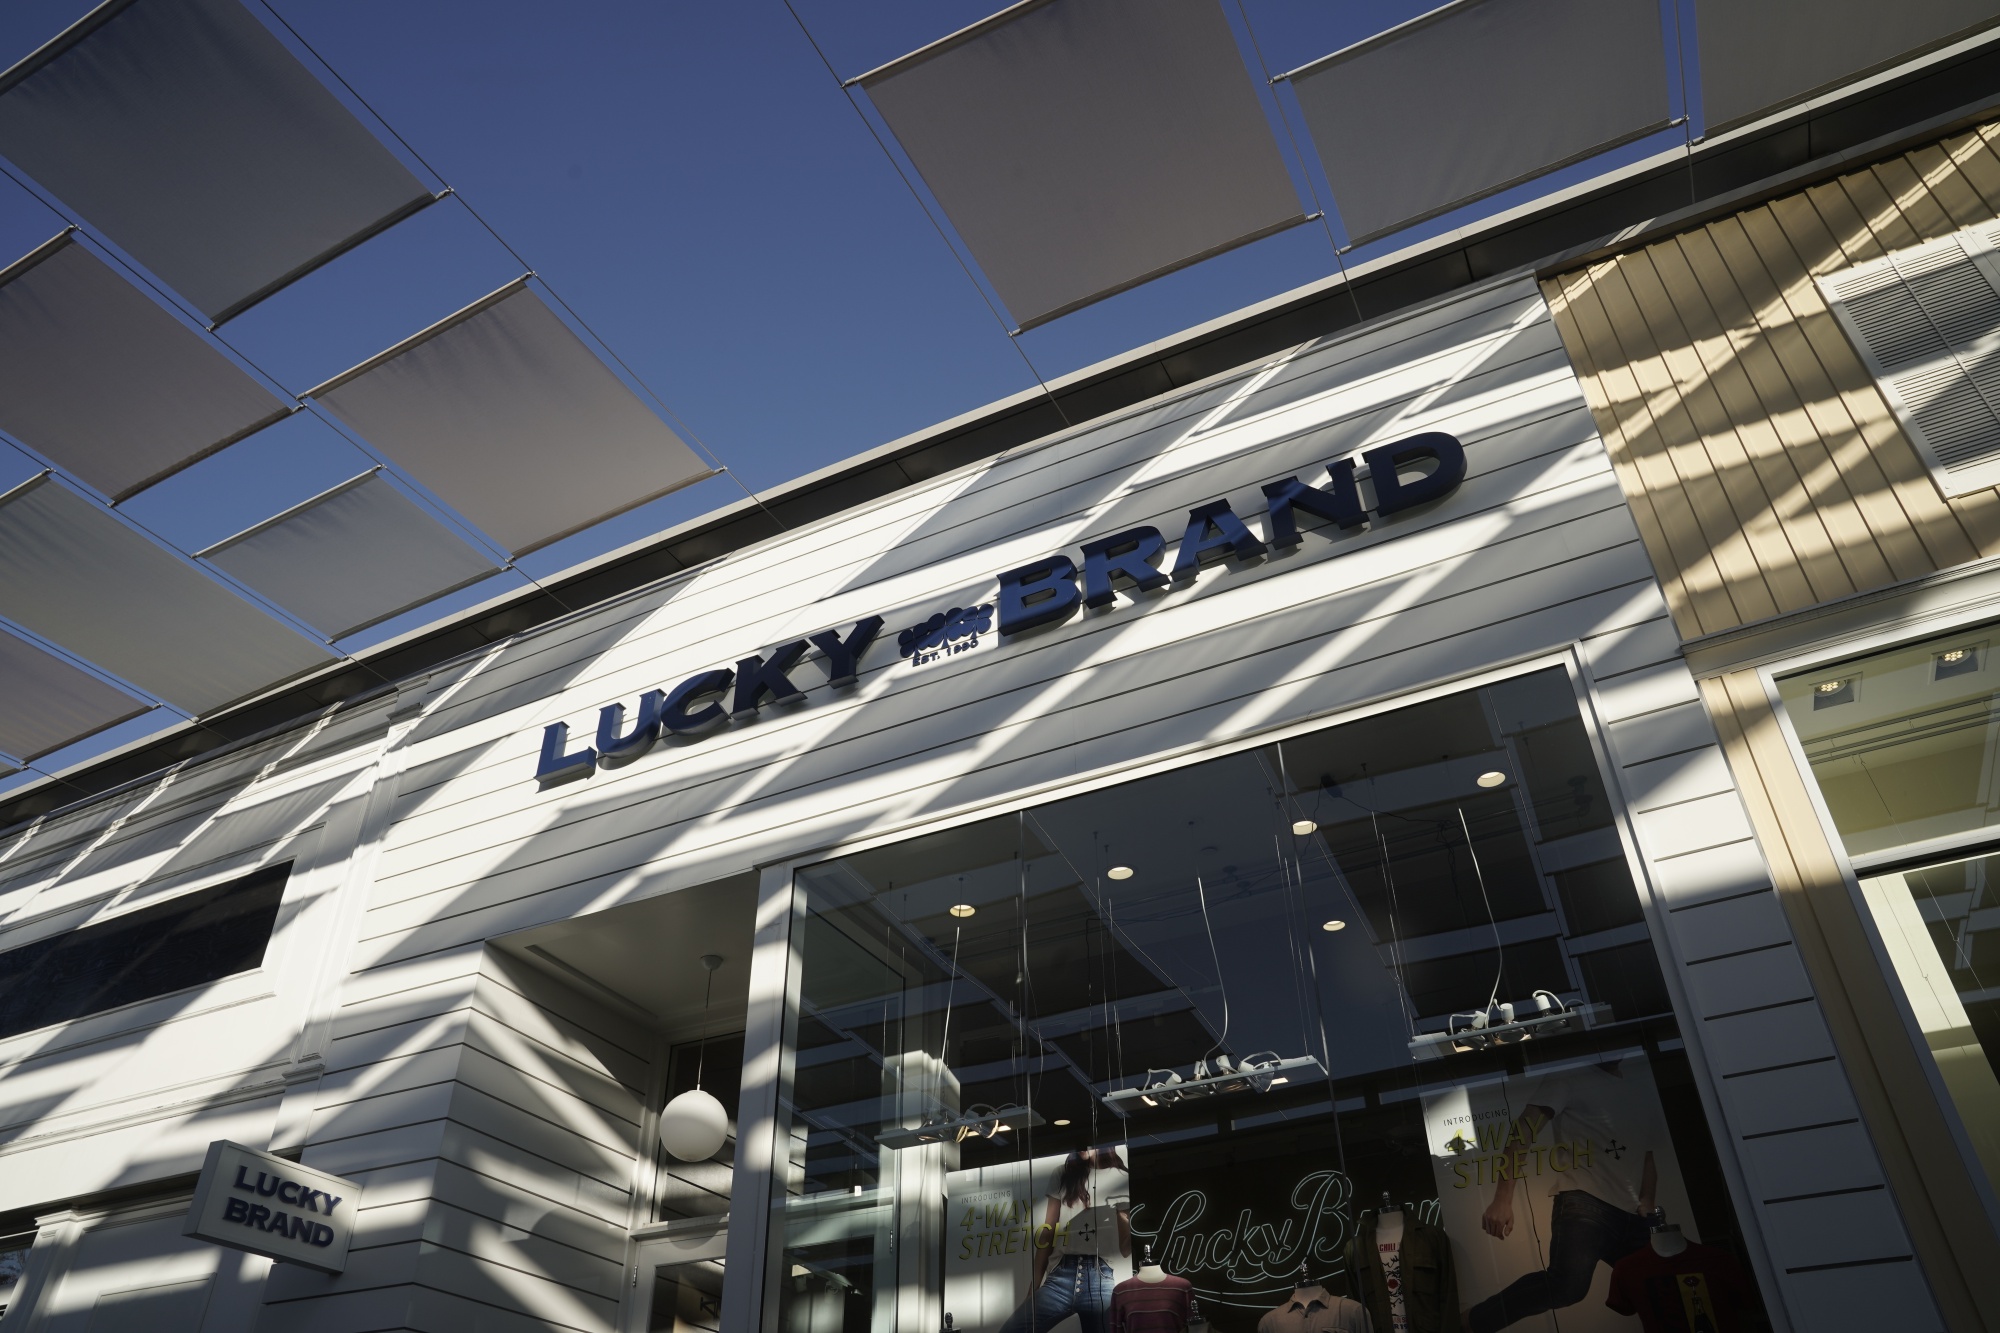 Lucky Brand Files for Bankruptcy After Pandemic Forces Closures - Bloomberg